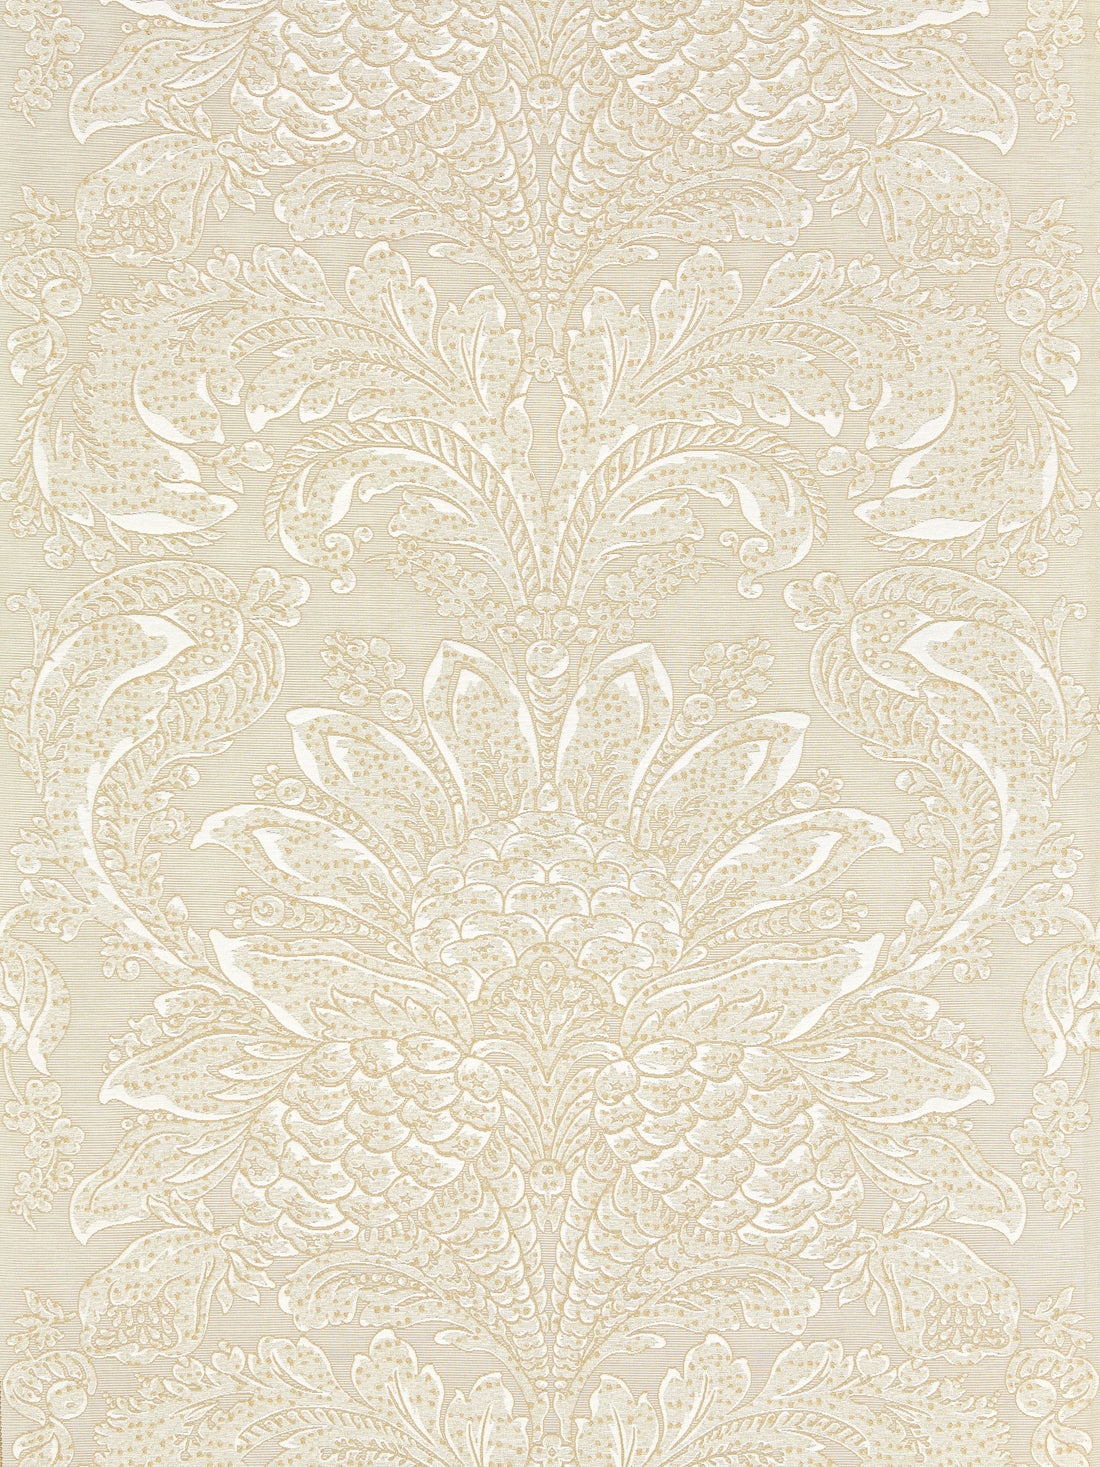 Carlotta Damask fabric in fog color - pattern number SC 000227081 - by Scalamandre in the Scalamandre Fabrics Book 1 collection